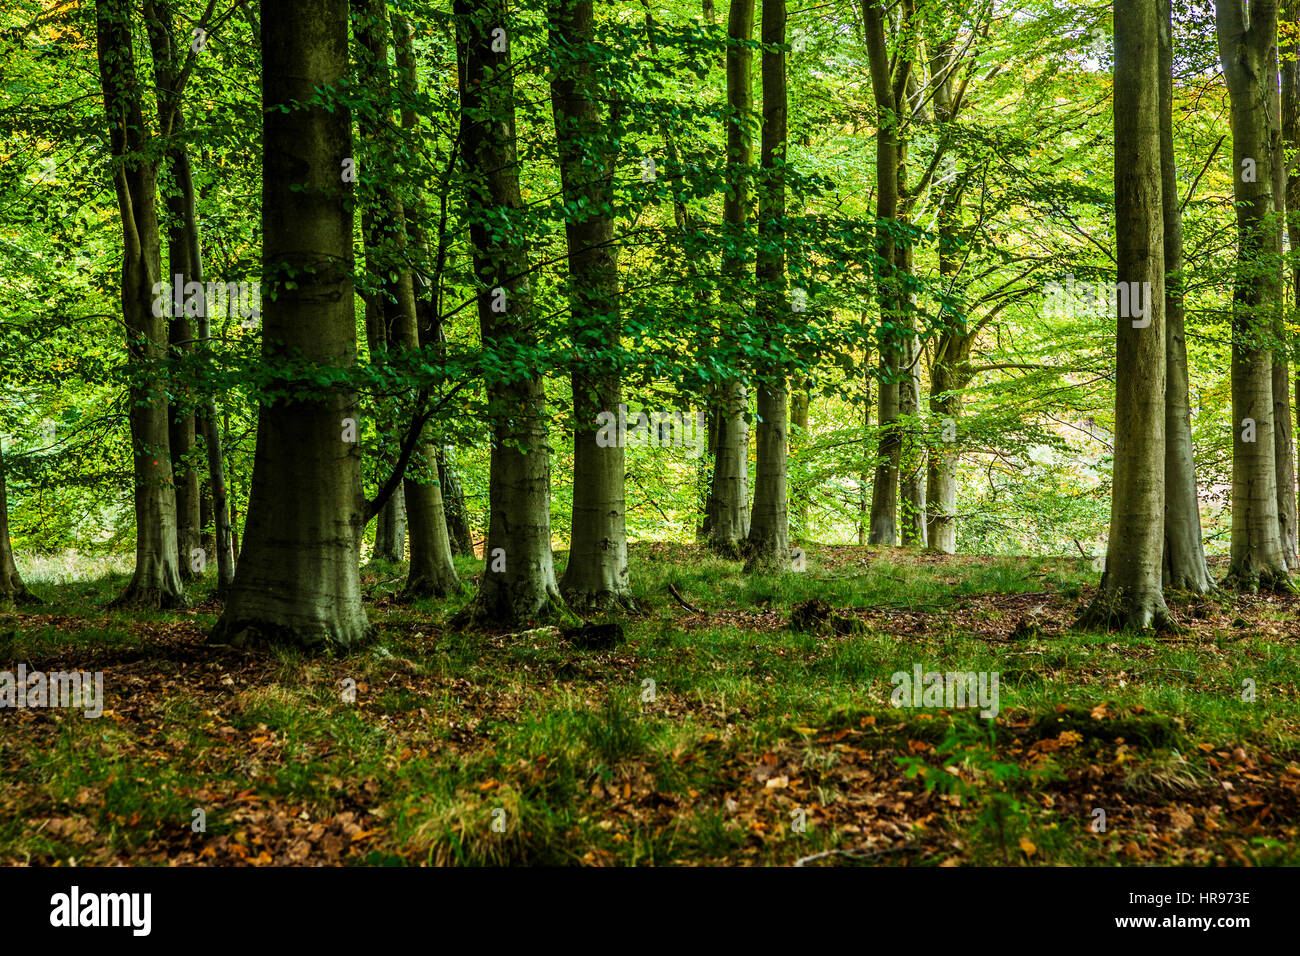 The Forest of Dean in Gloucestershire. Stock Photo